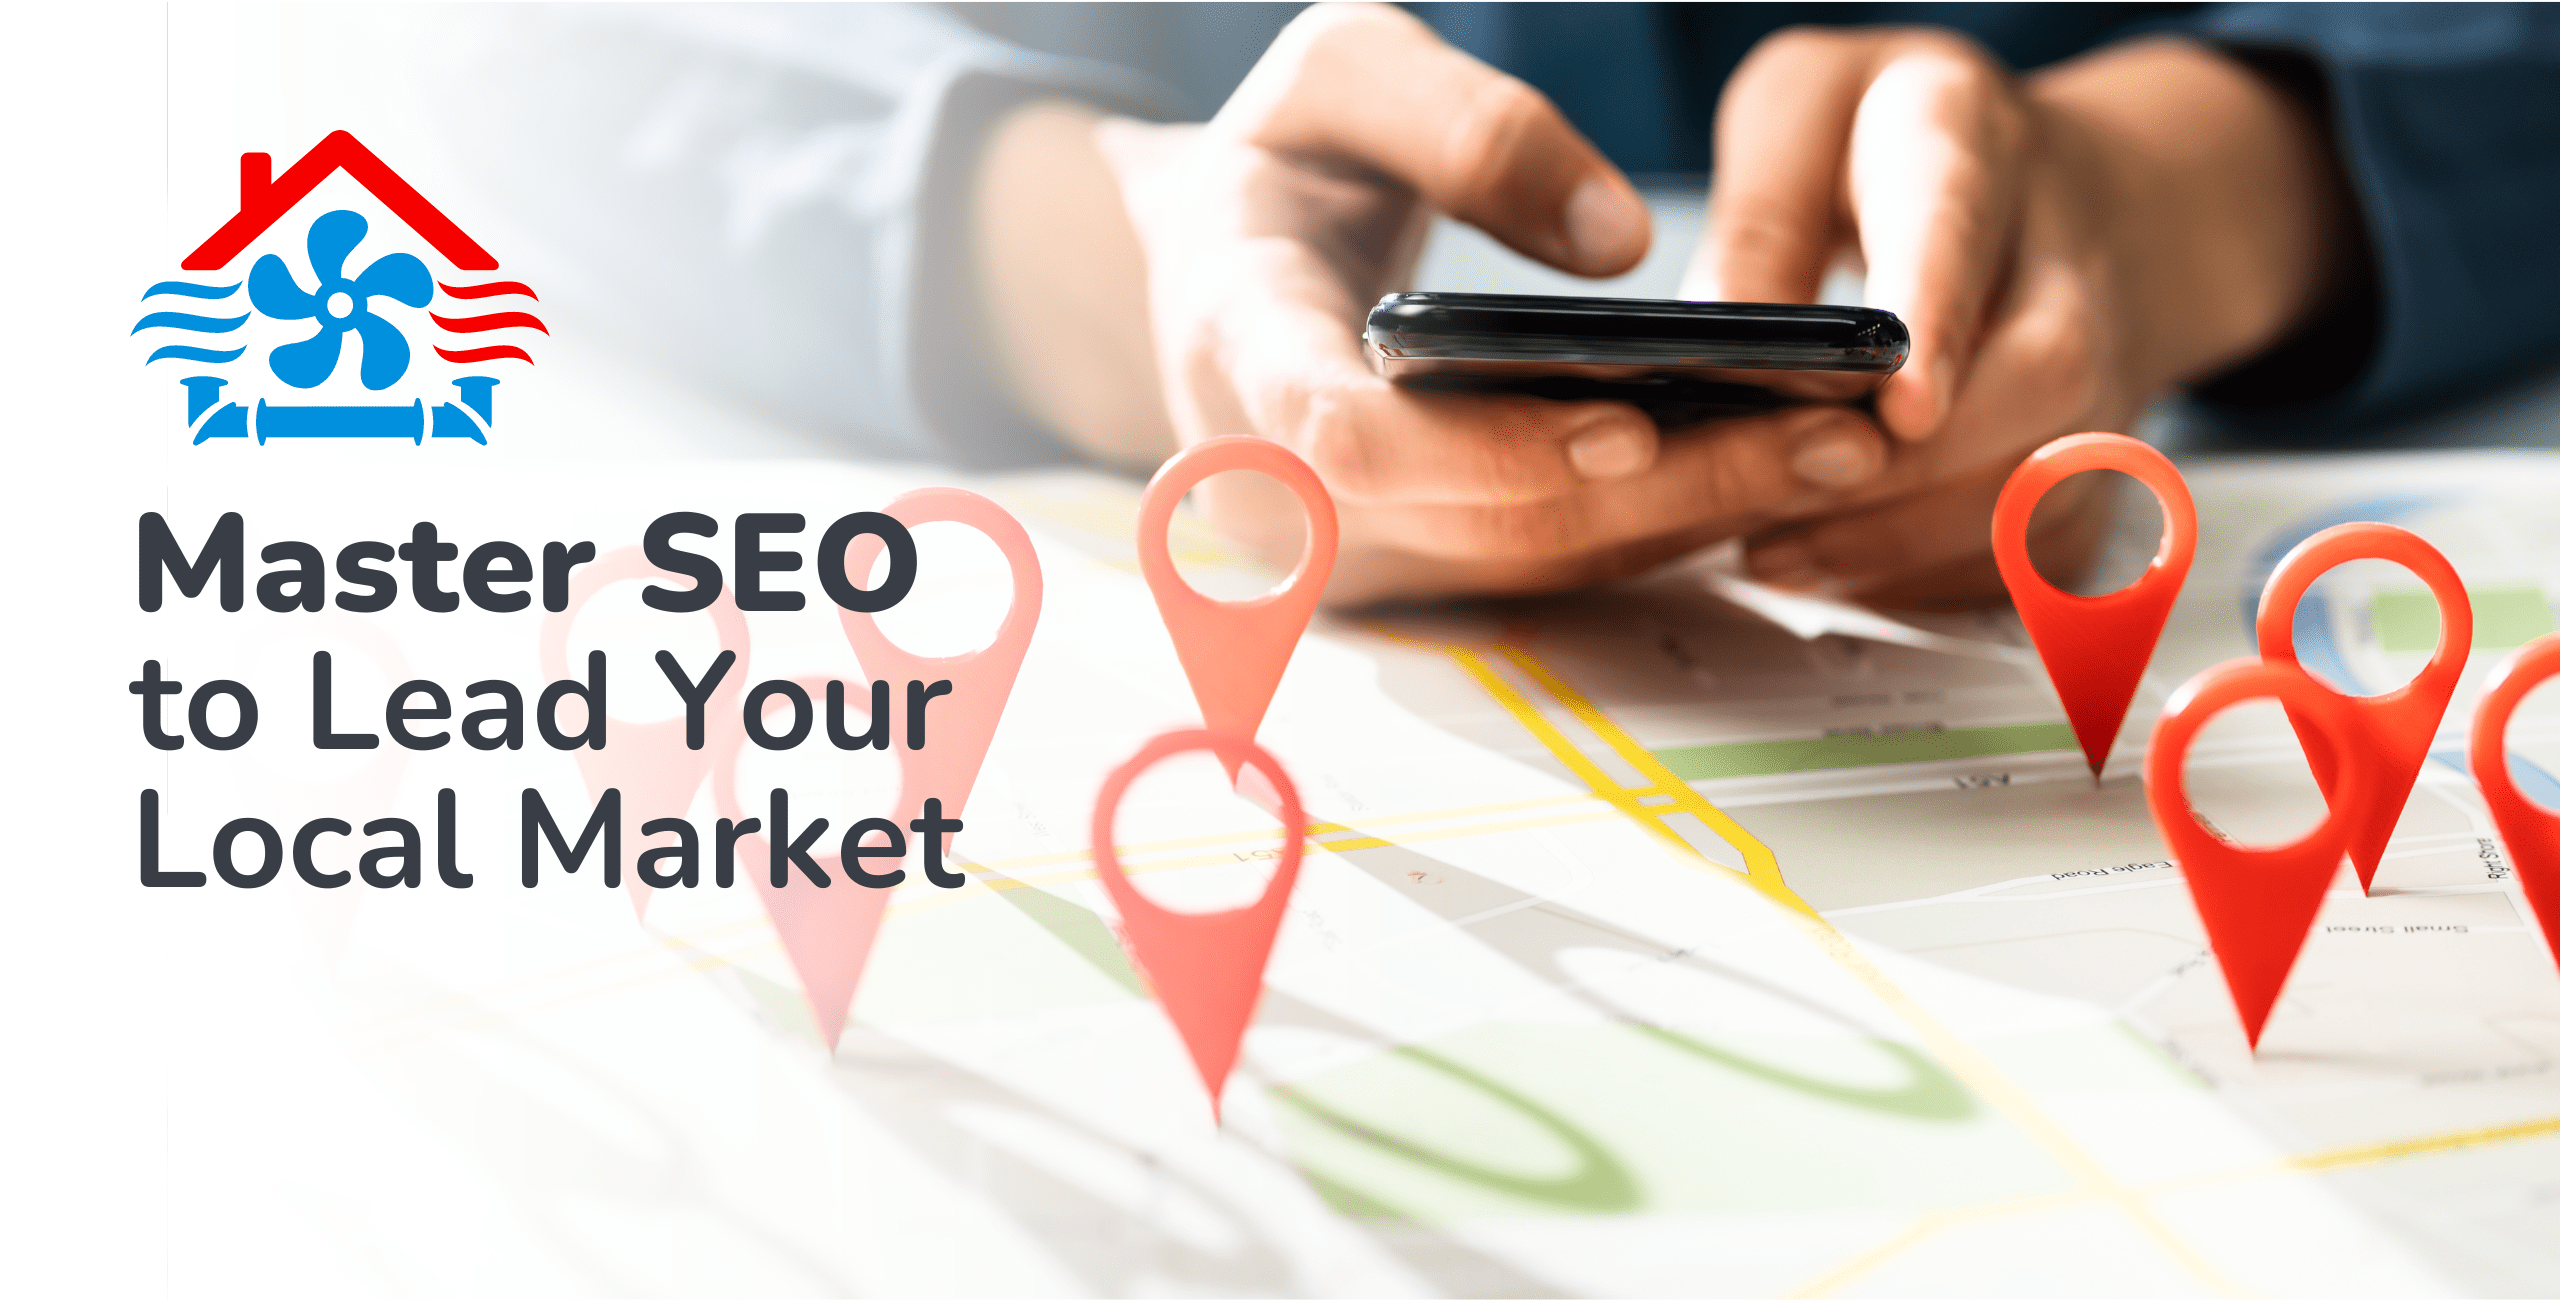 Master SEO & Lead Your Local Market